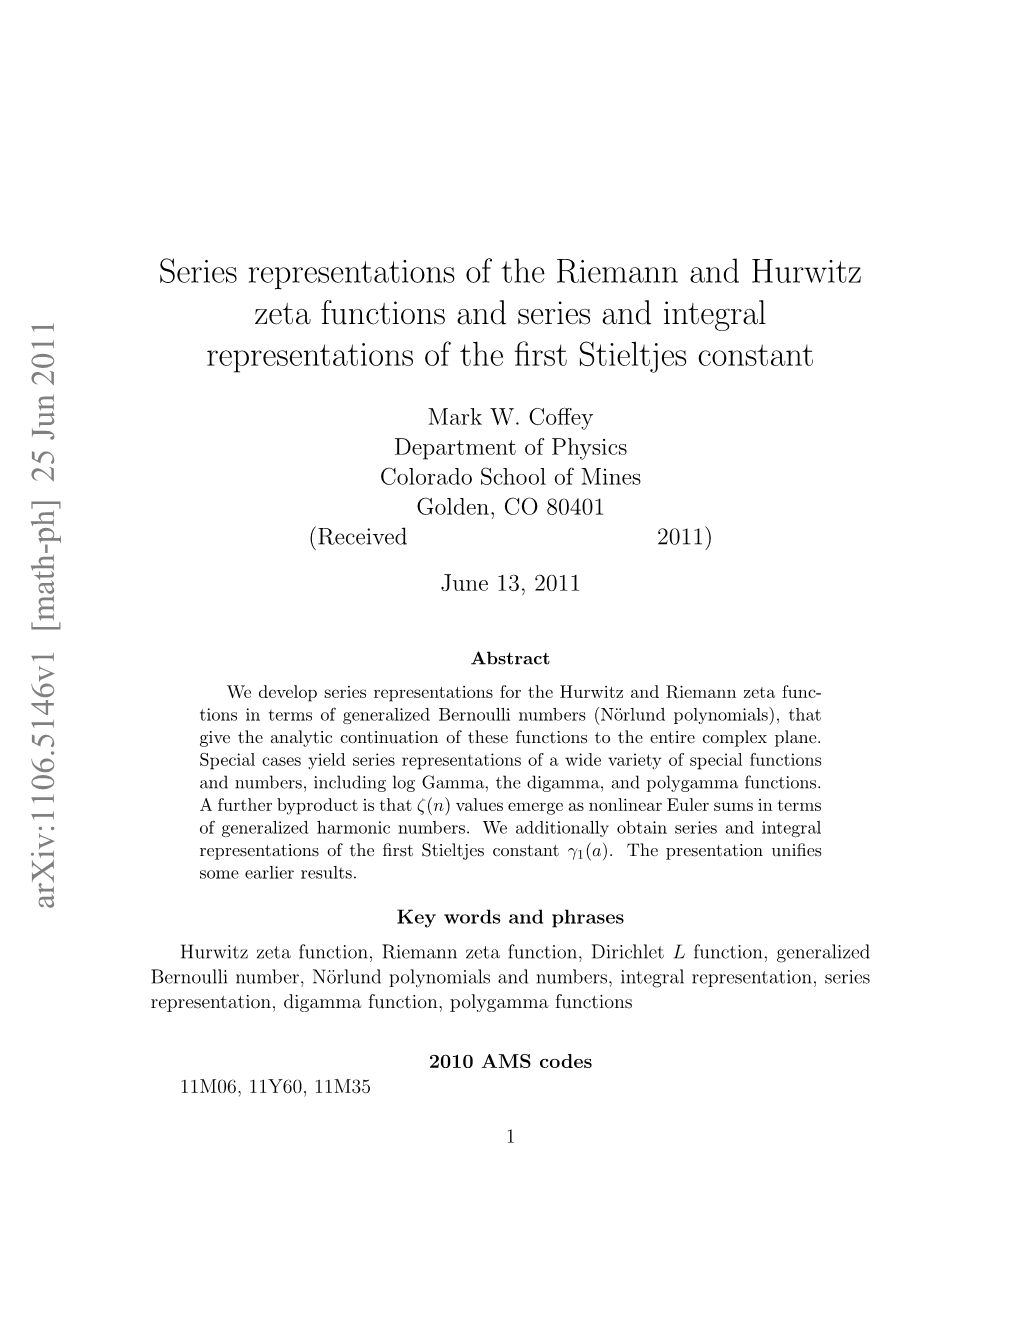 Series Representations of the Riemann and Hurwitz Zeta Functions And